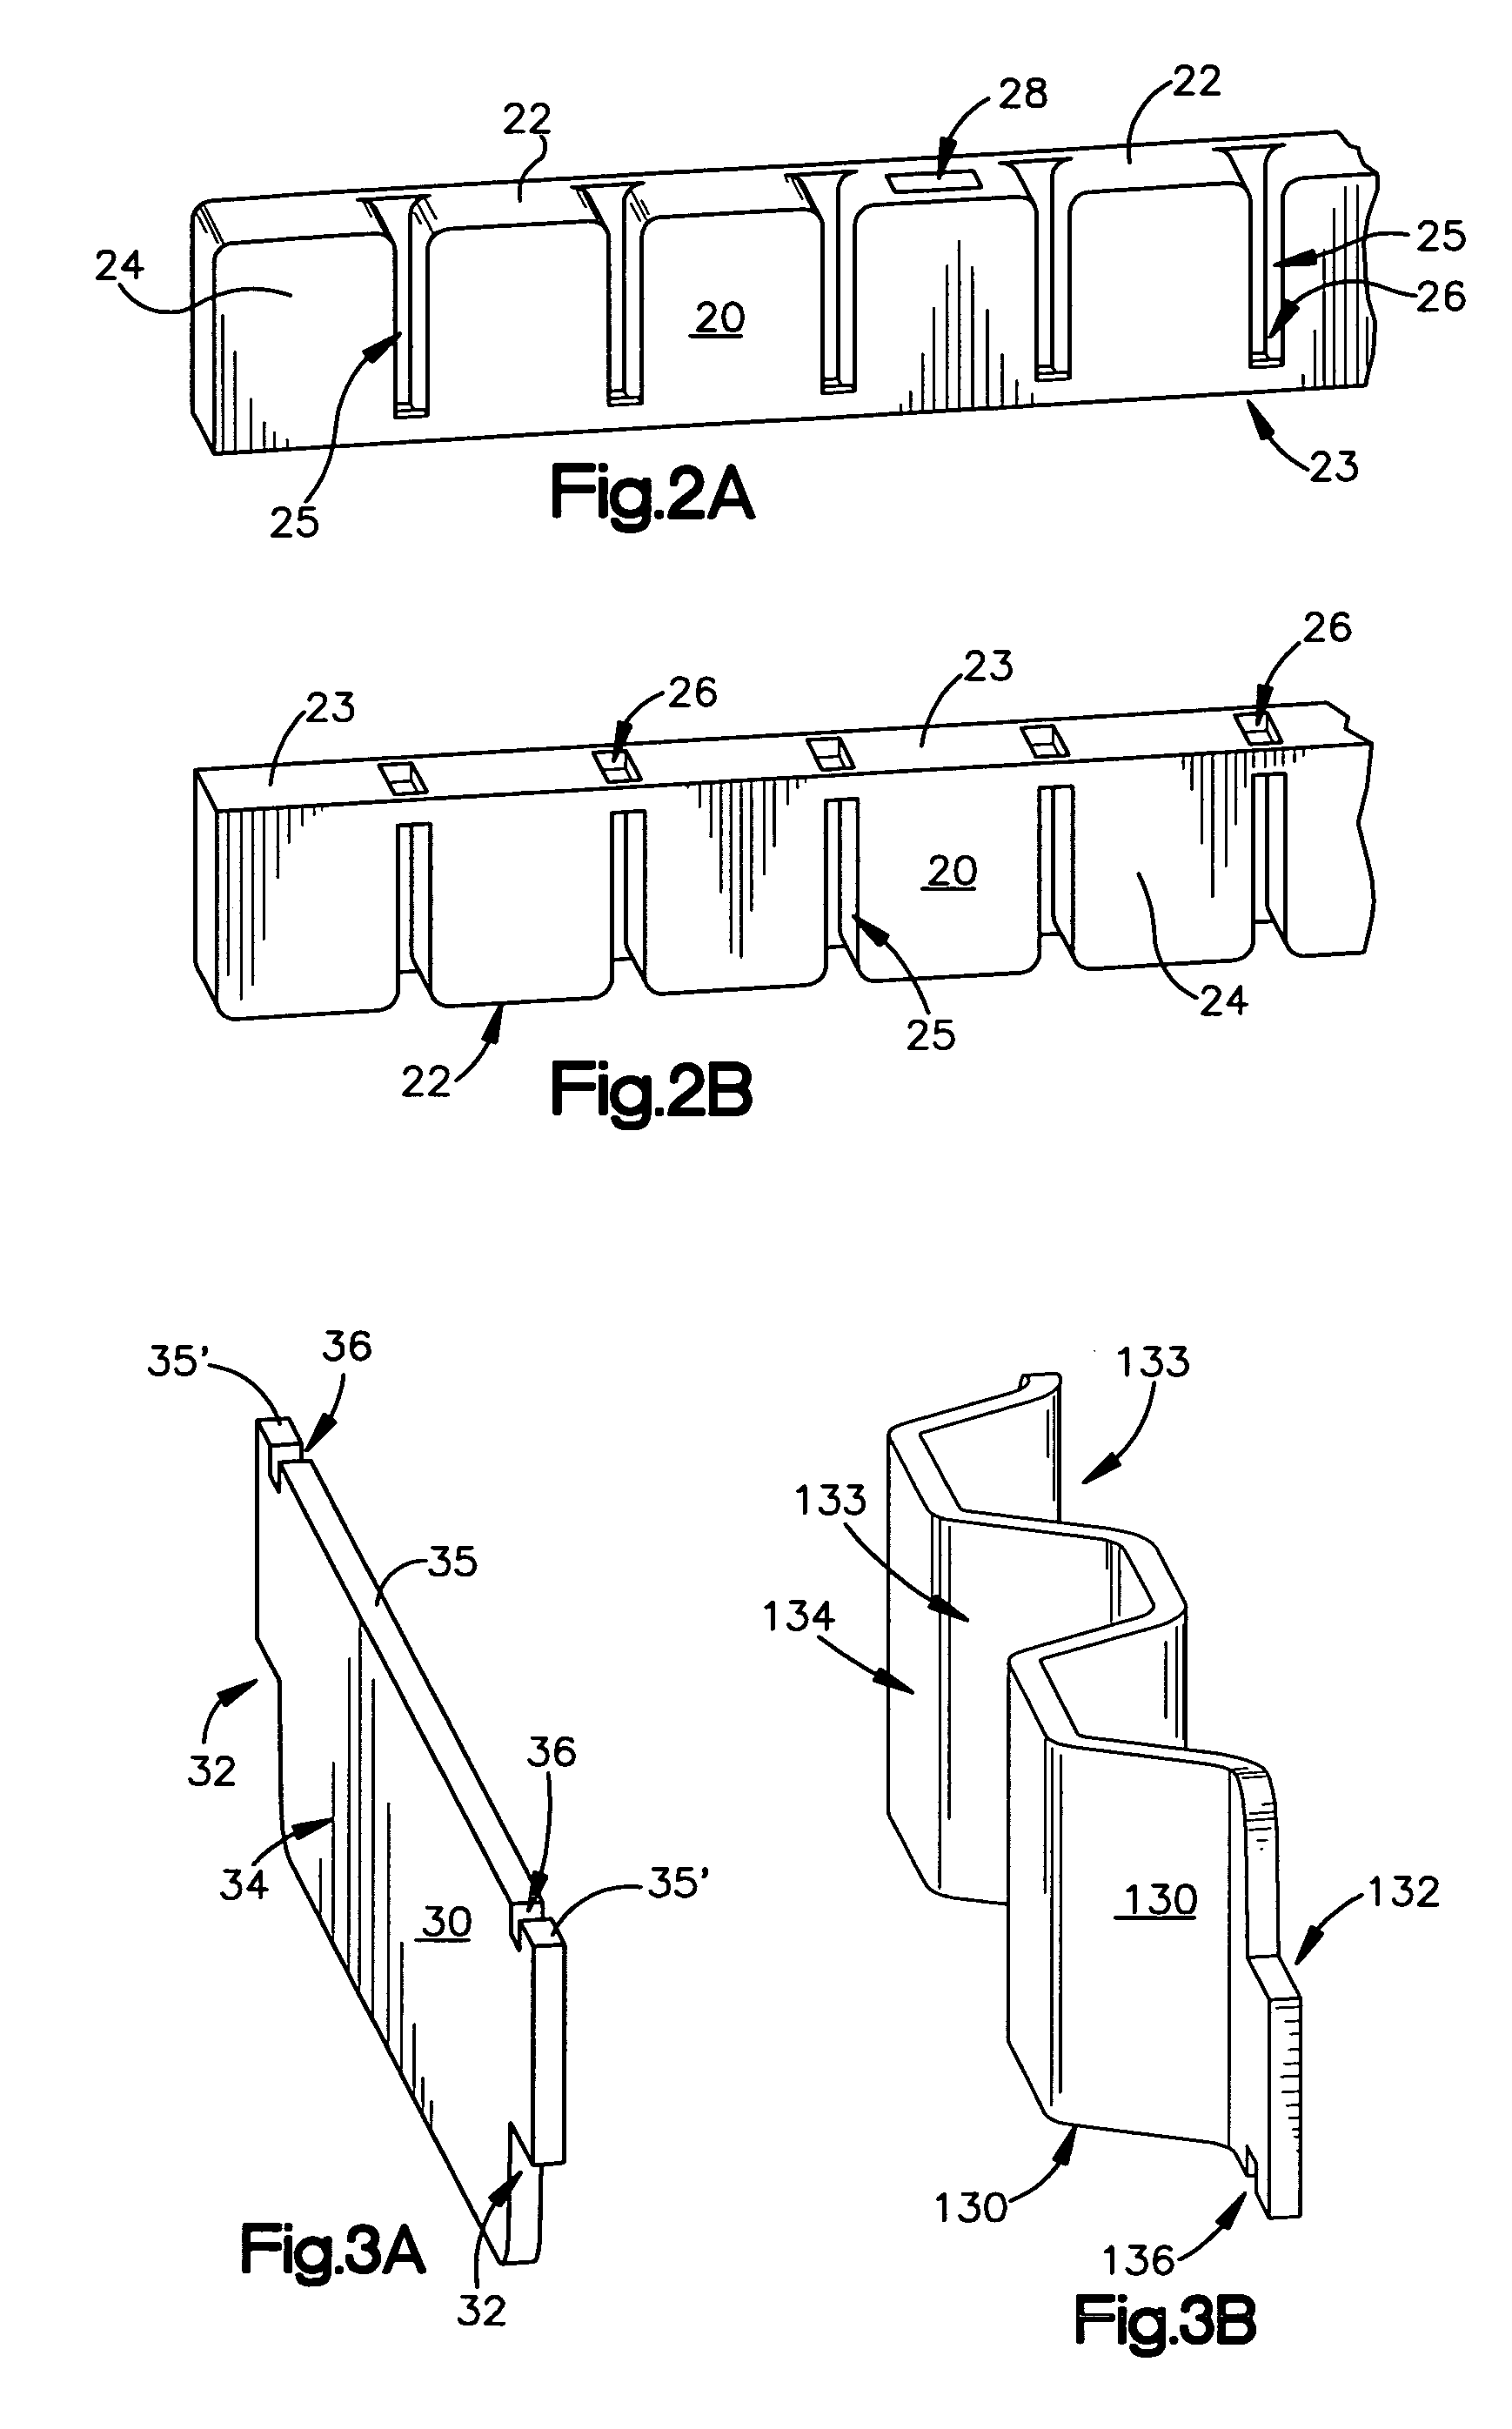 Drainage grate assembly